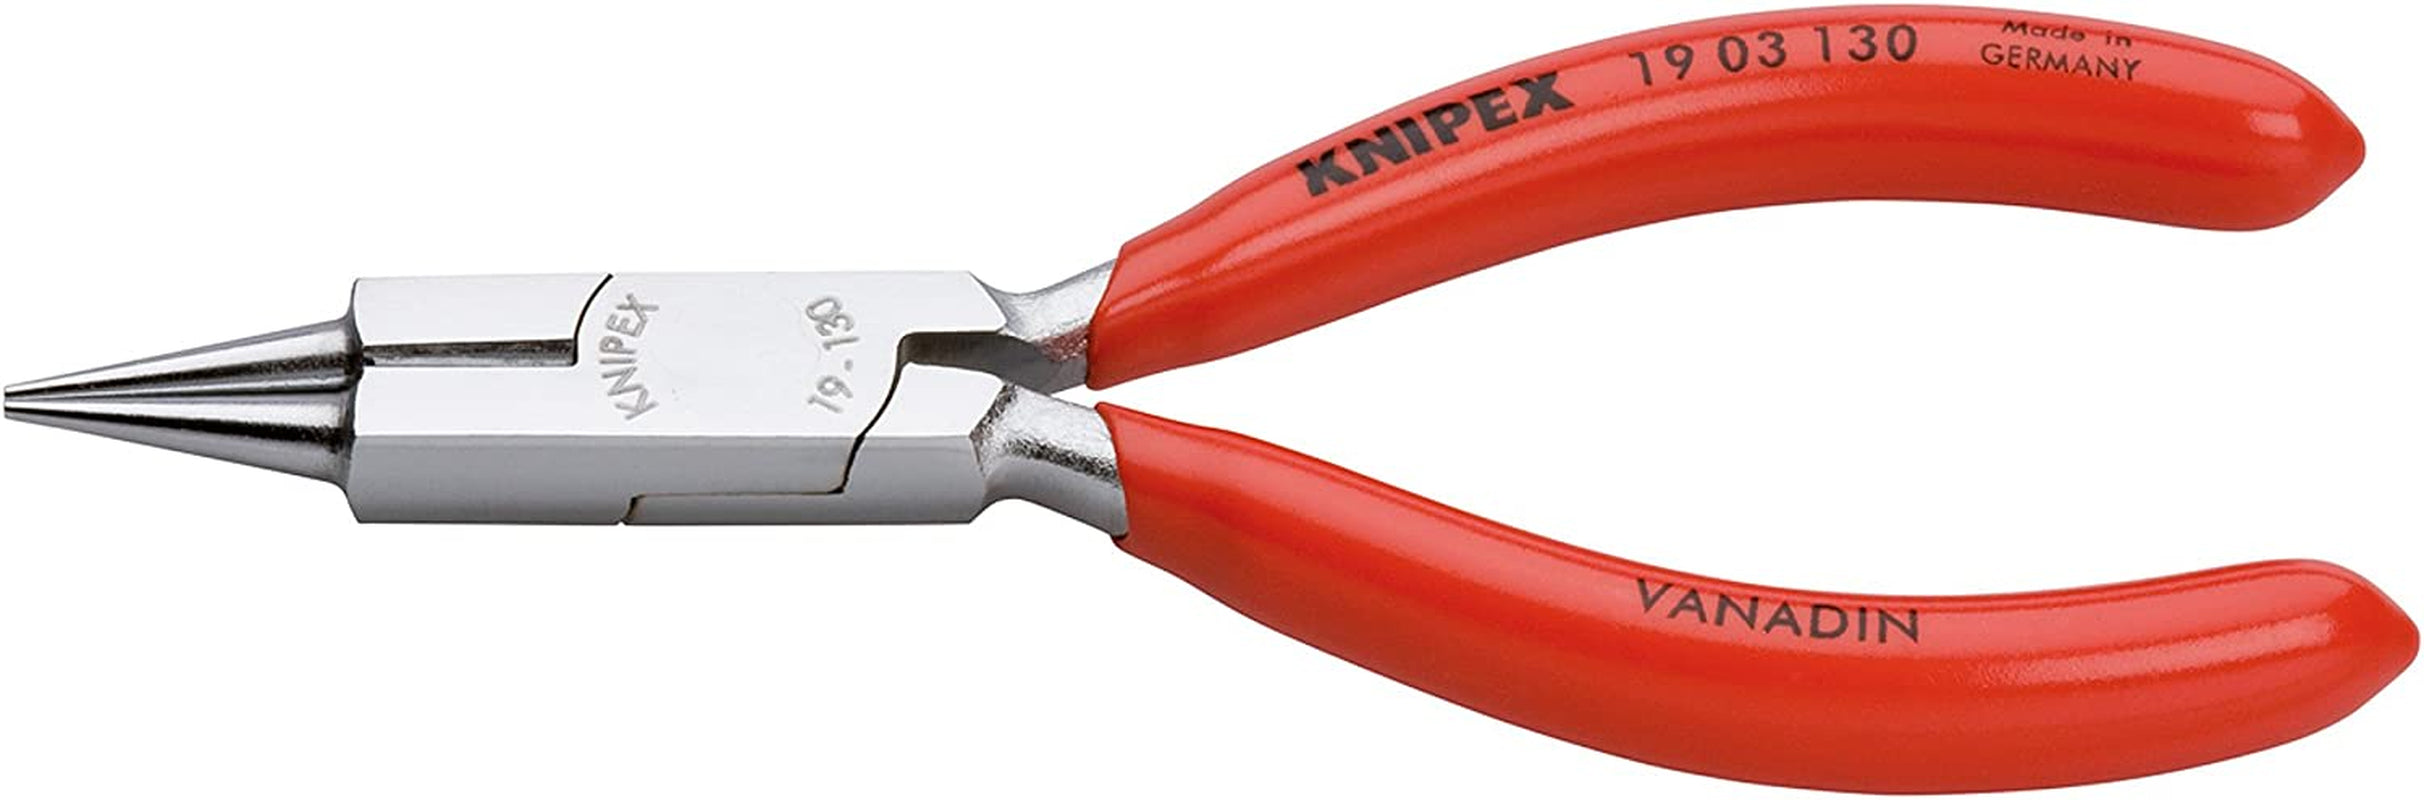 KNIPEX, Knipex 19 03 130 round Nose Pliers with Cutting Edge (Jewellers' Pliers) Chrome Plated Plastic Coated, 130 Mm